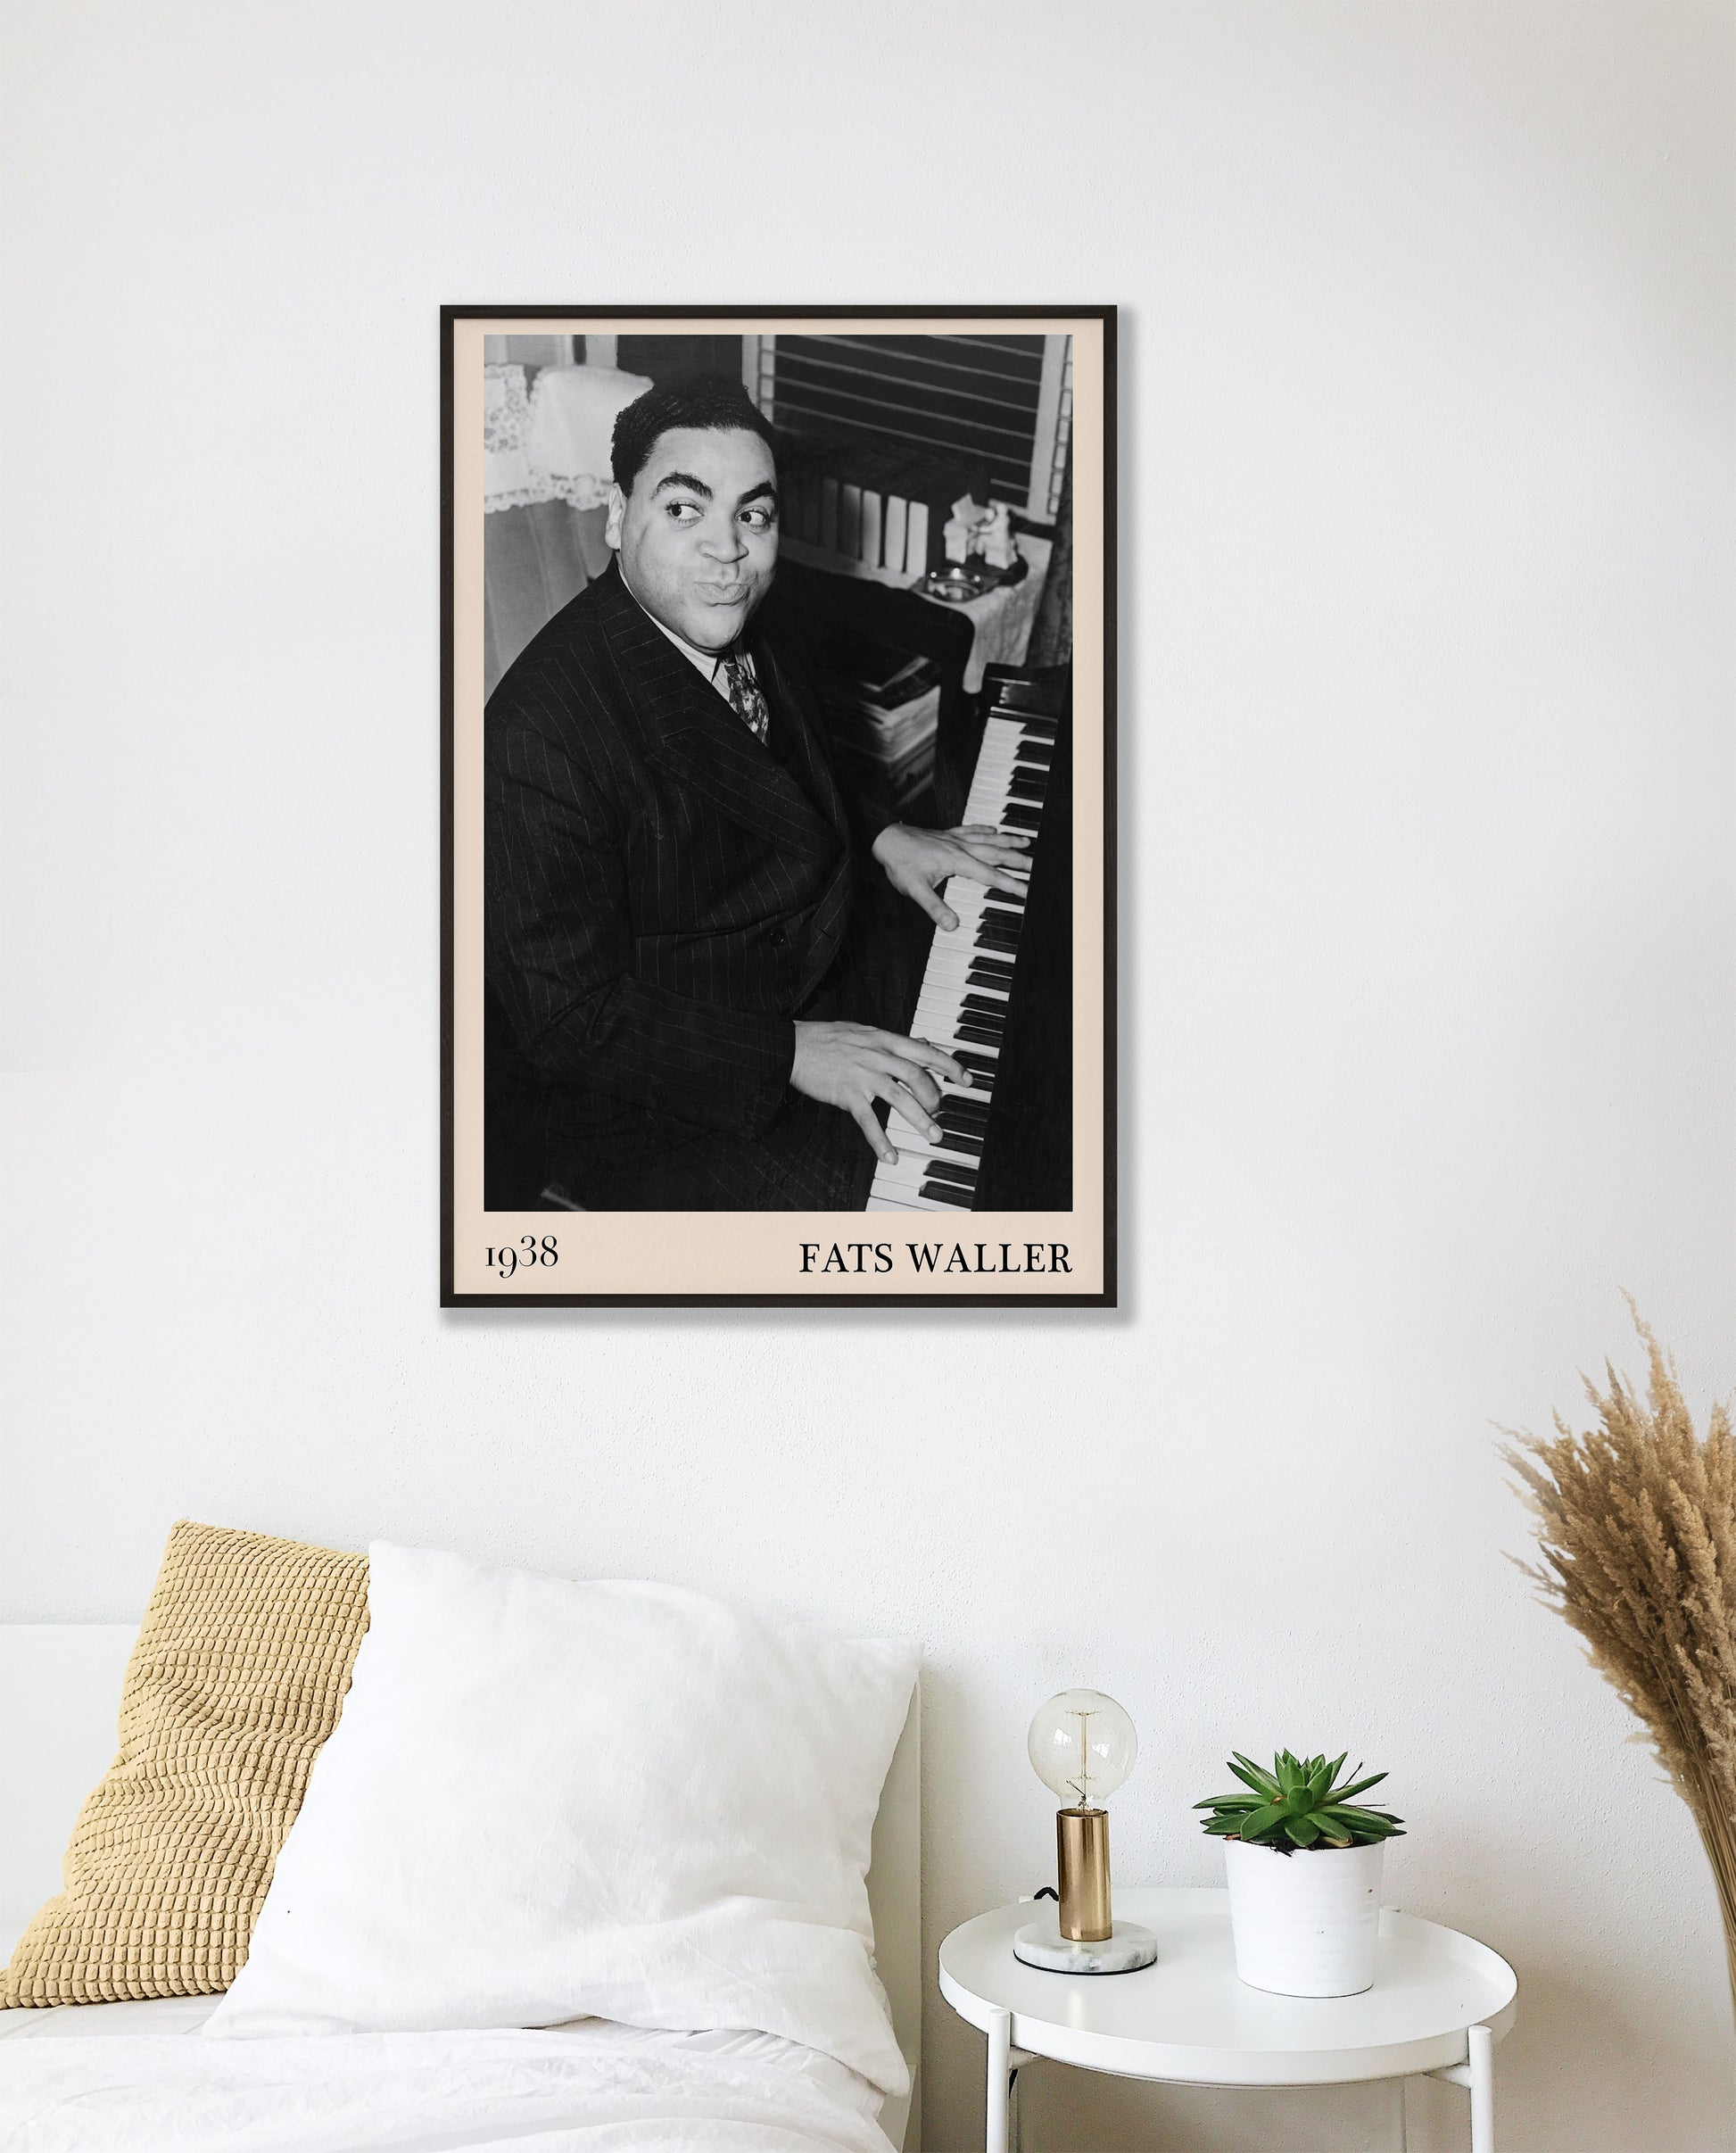 1938 photograph of Fats Waller crafted into a cool black framed jazz poster. The poster is hanging on a white bedroom room wall.